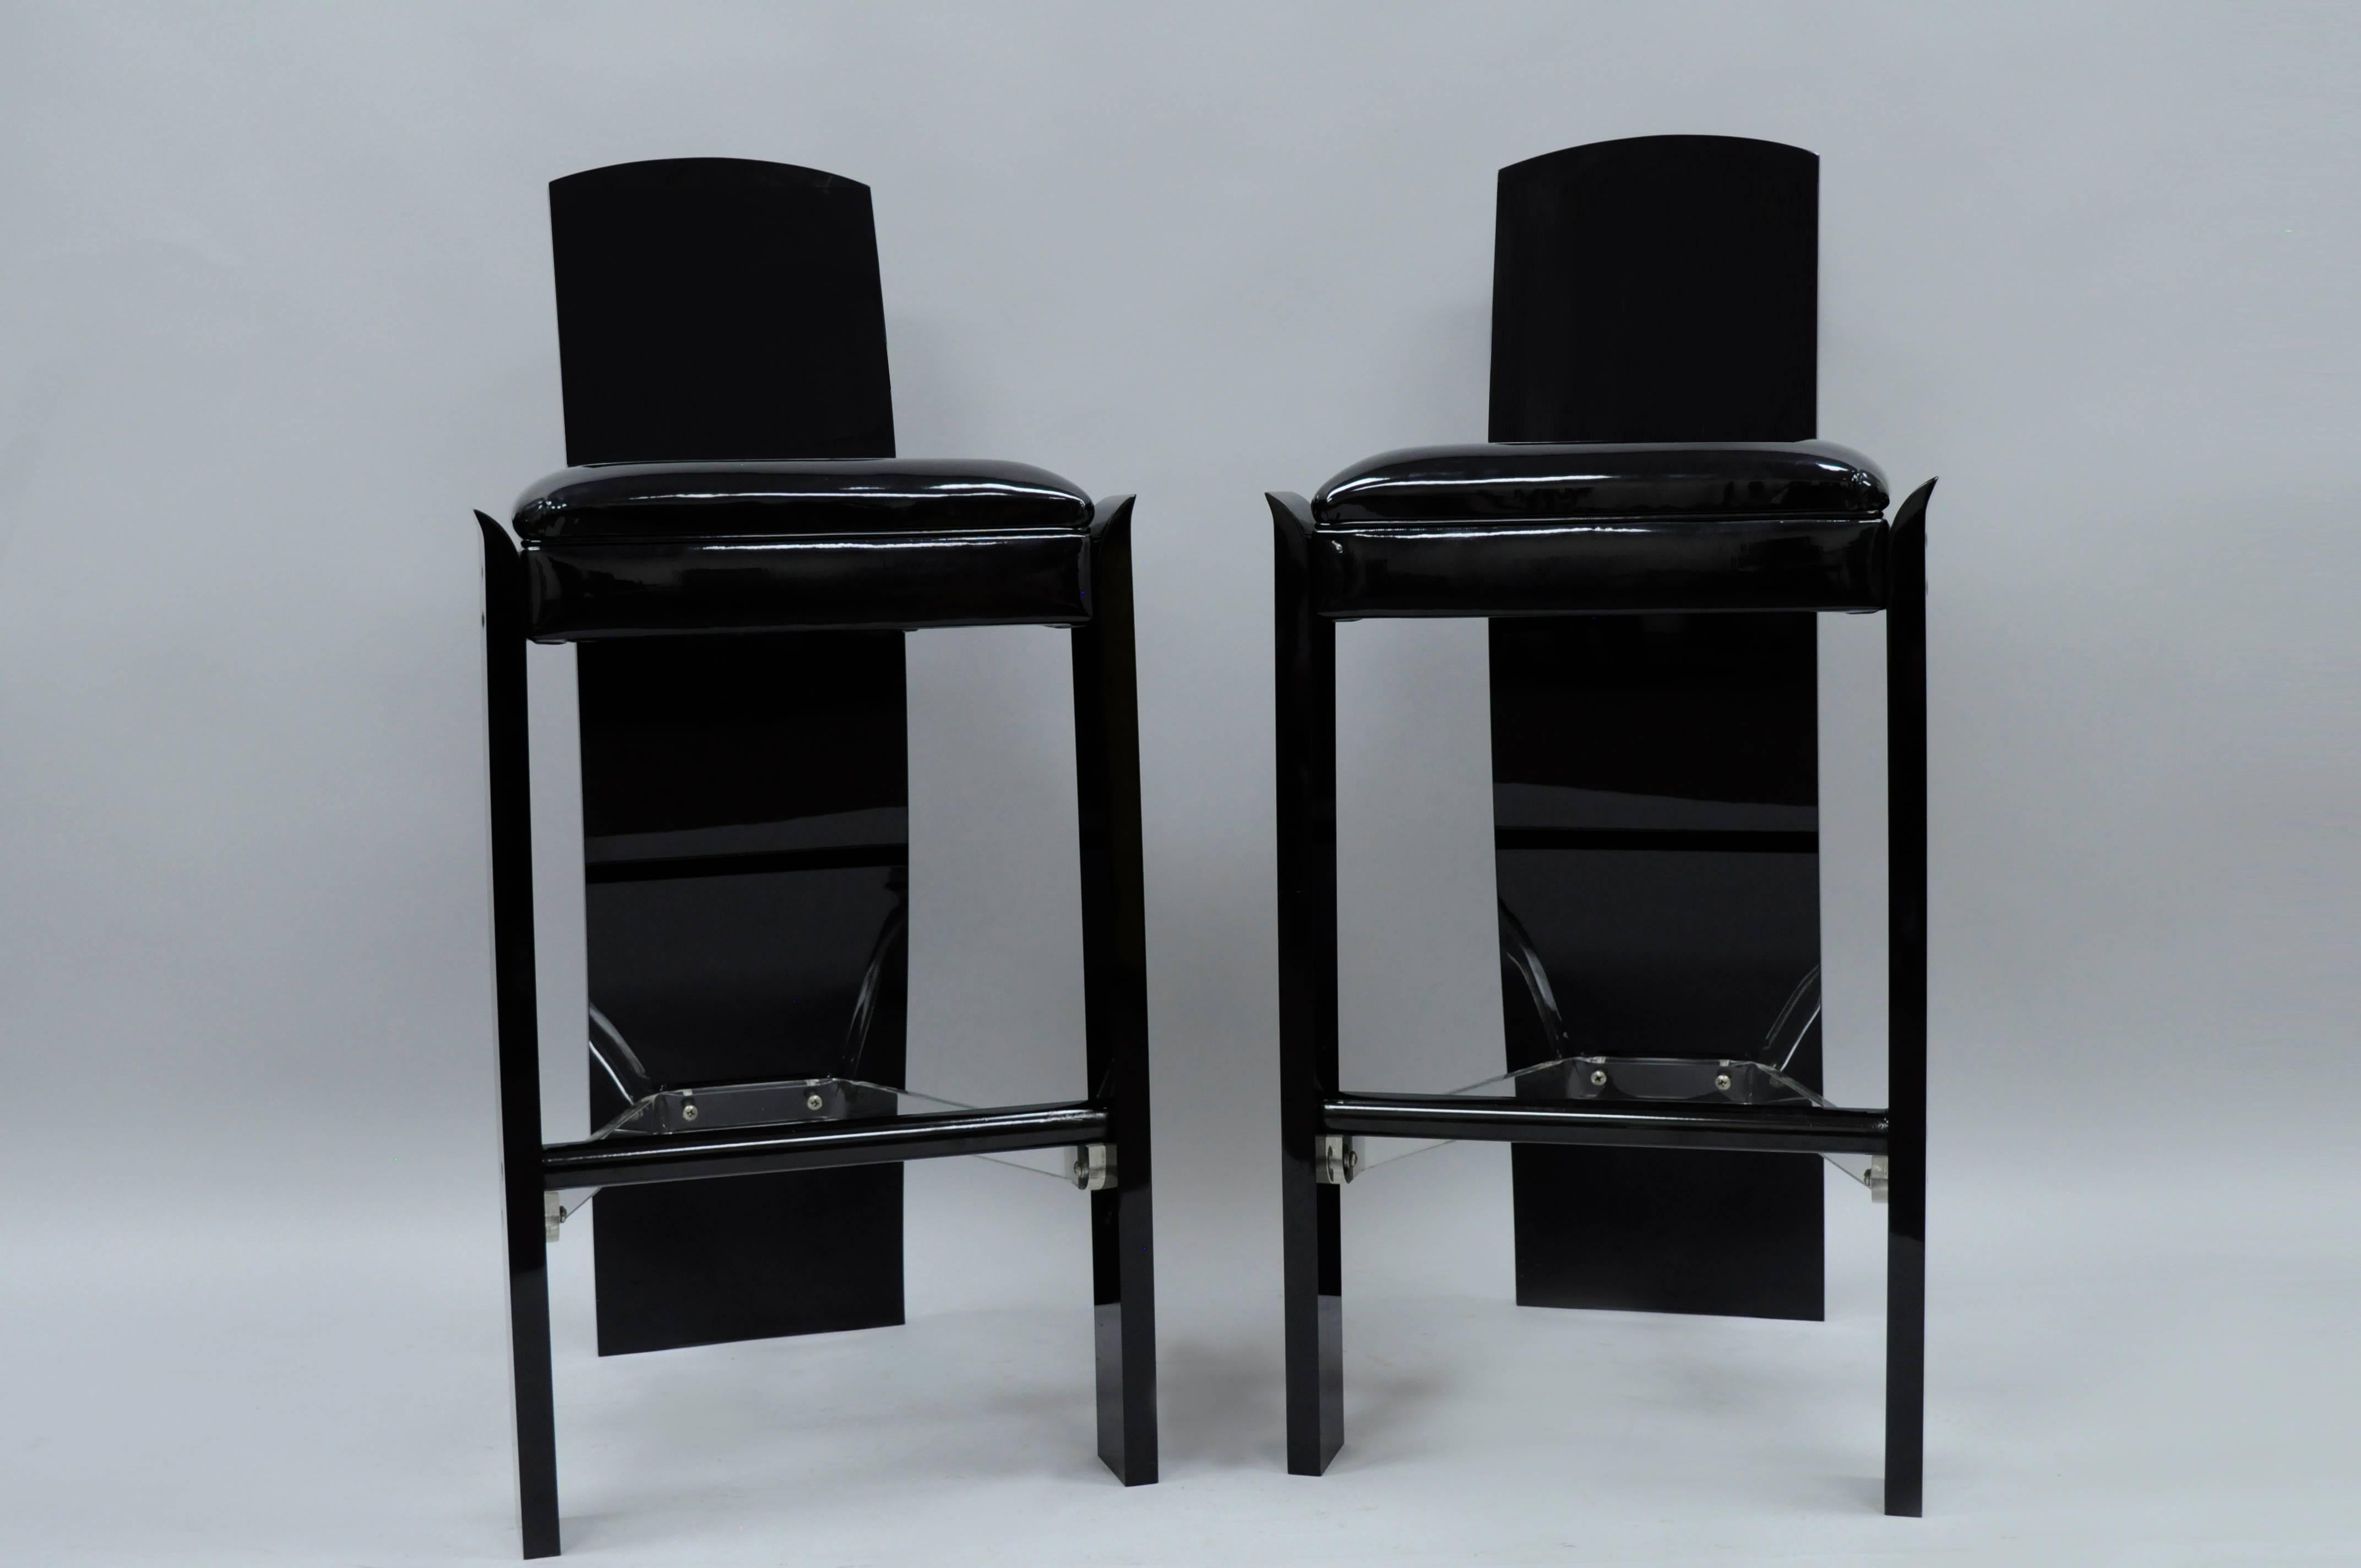 Pair of Vintage Mid Century Modern Black Lucite Acrylic Sculptural Bar Stools by Hill Manufacturing in the manner of Charles Hollis Jones. Item features thick lucite construction, clear lucite stretcher supports, black metal footrests, black patent